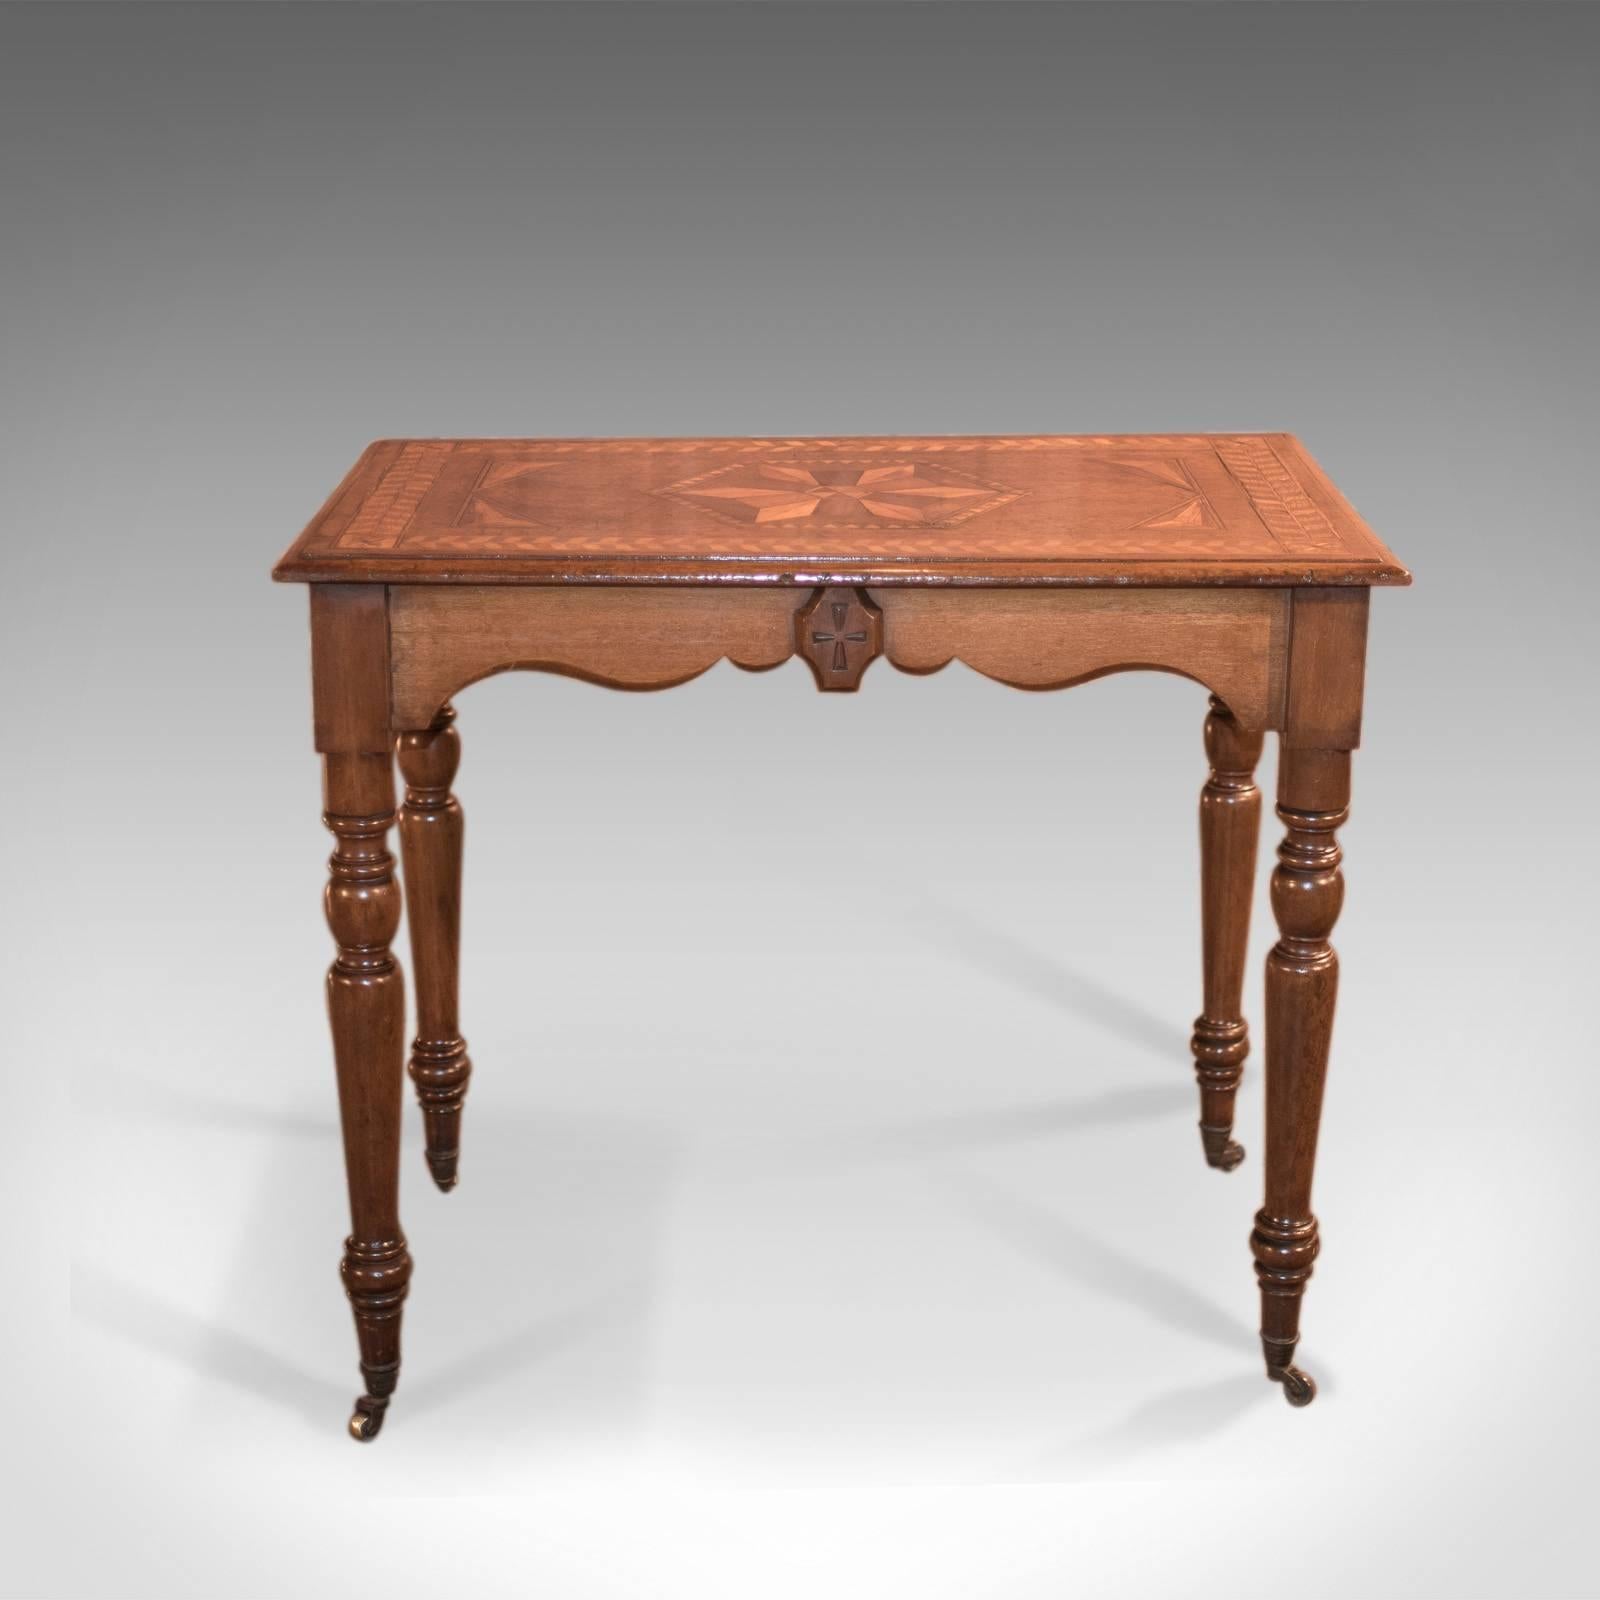 This is an attractive, antique side table dating to the late Georgian period circa 1800.

Light oak with honey tones
Desirable hues and an aged patina
Geometric inlay of oak, birch and mahogany
Ecclesiastical overtones
Serpentine chamfered